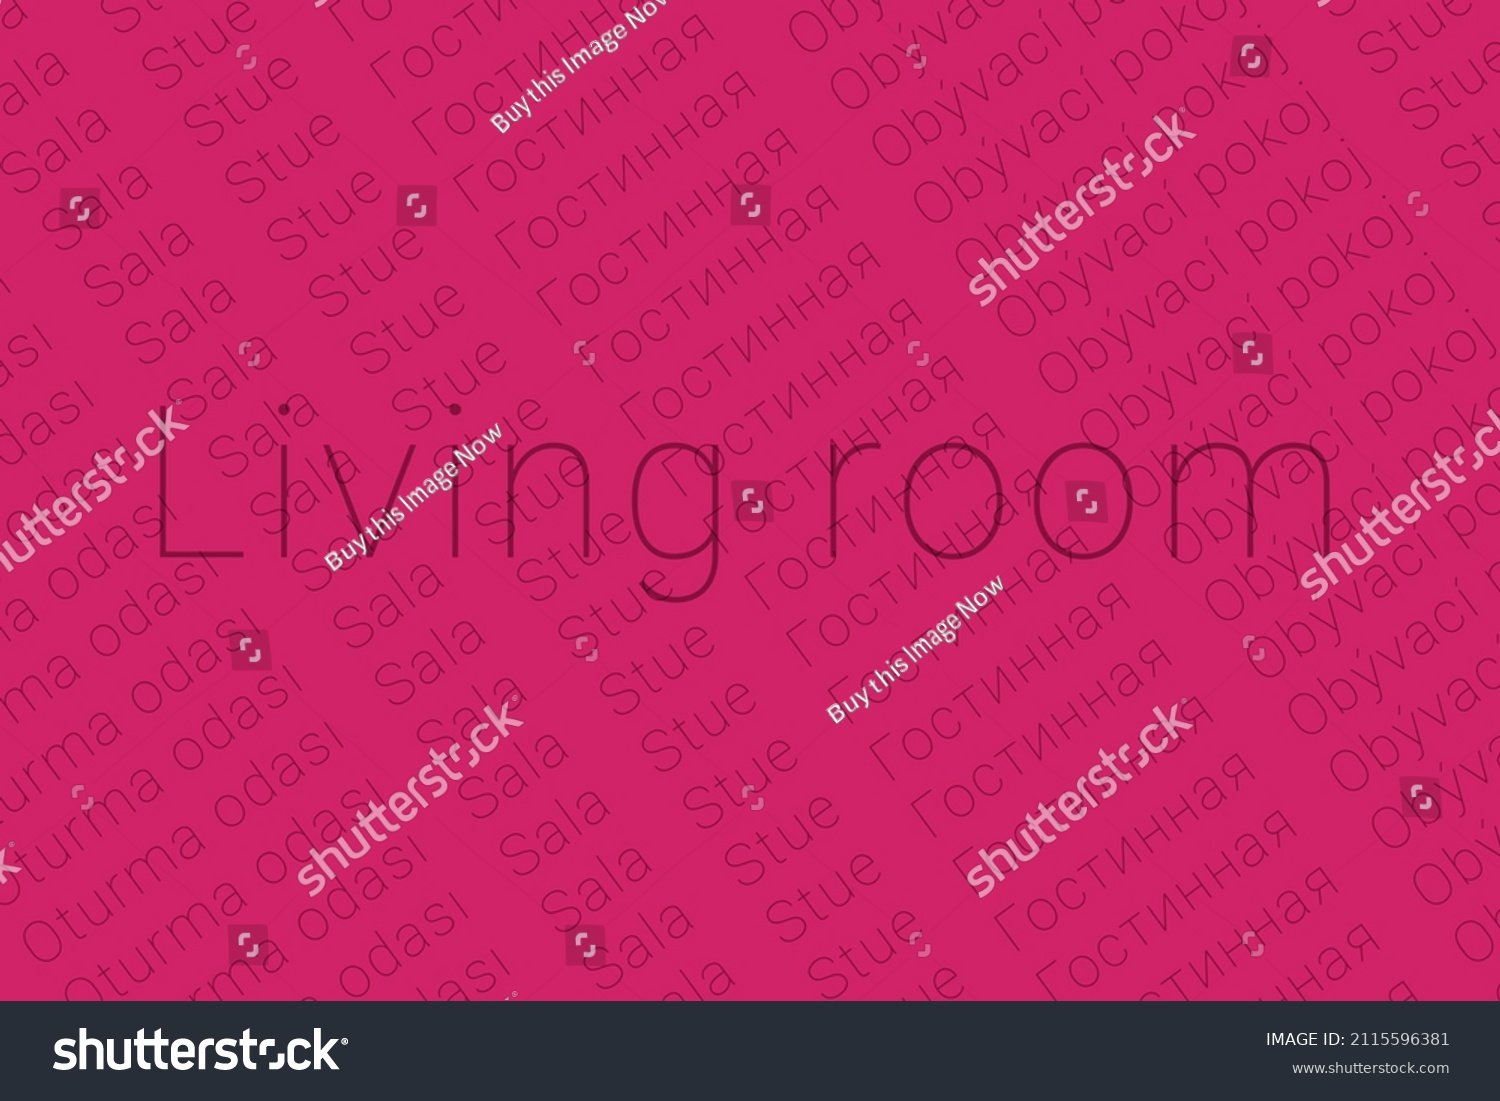 The Word For The Living Room